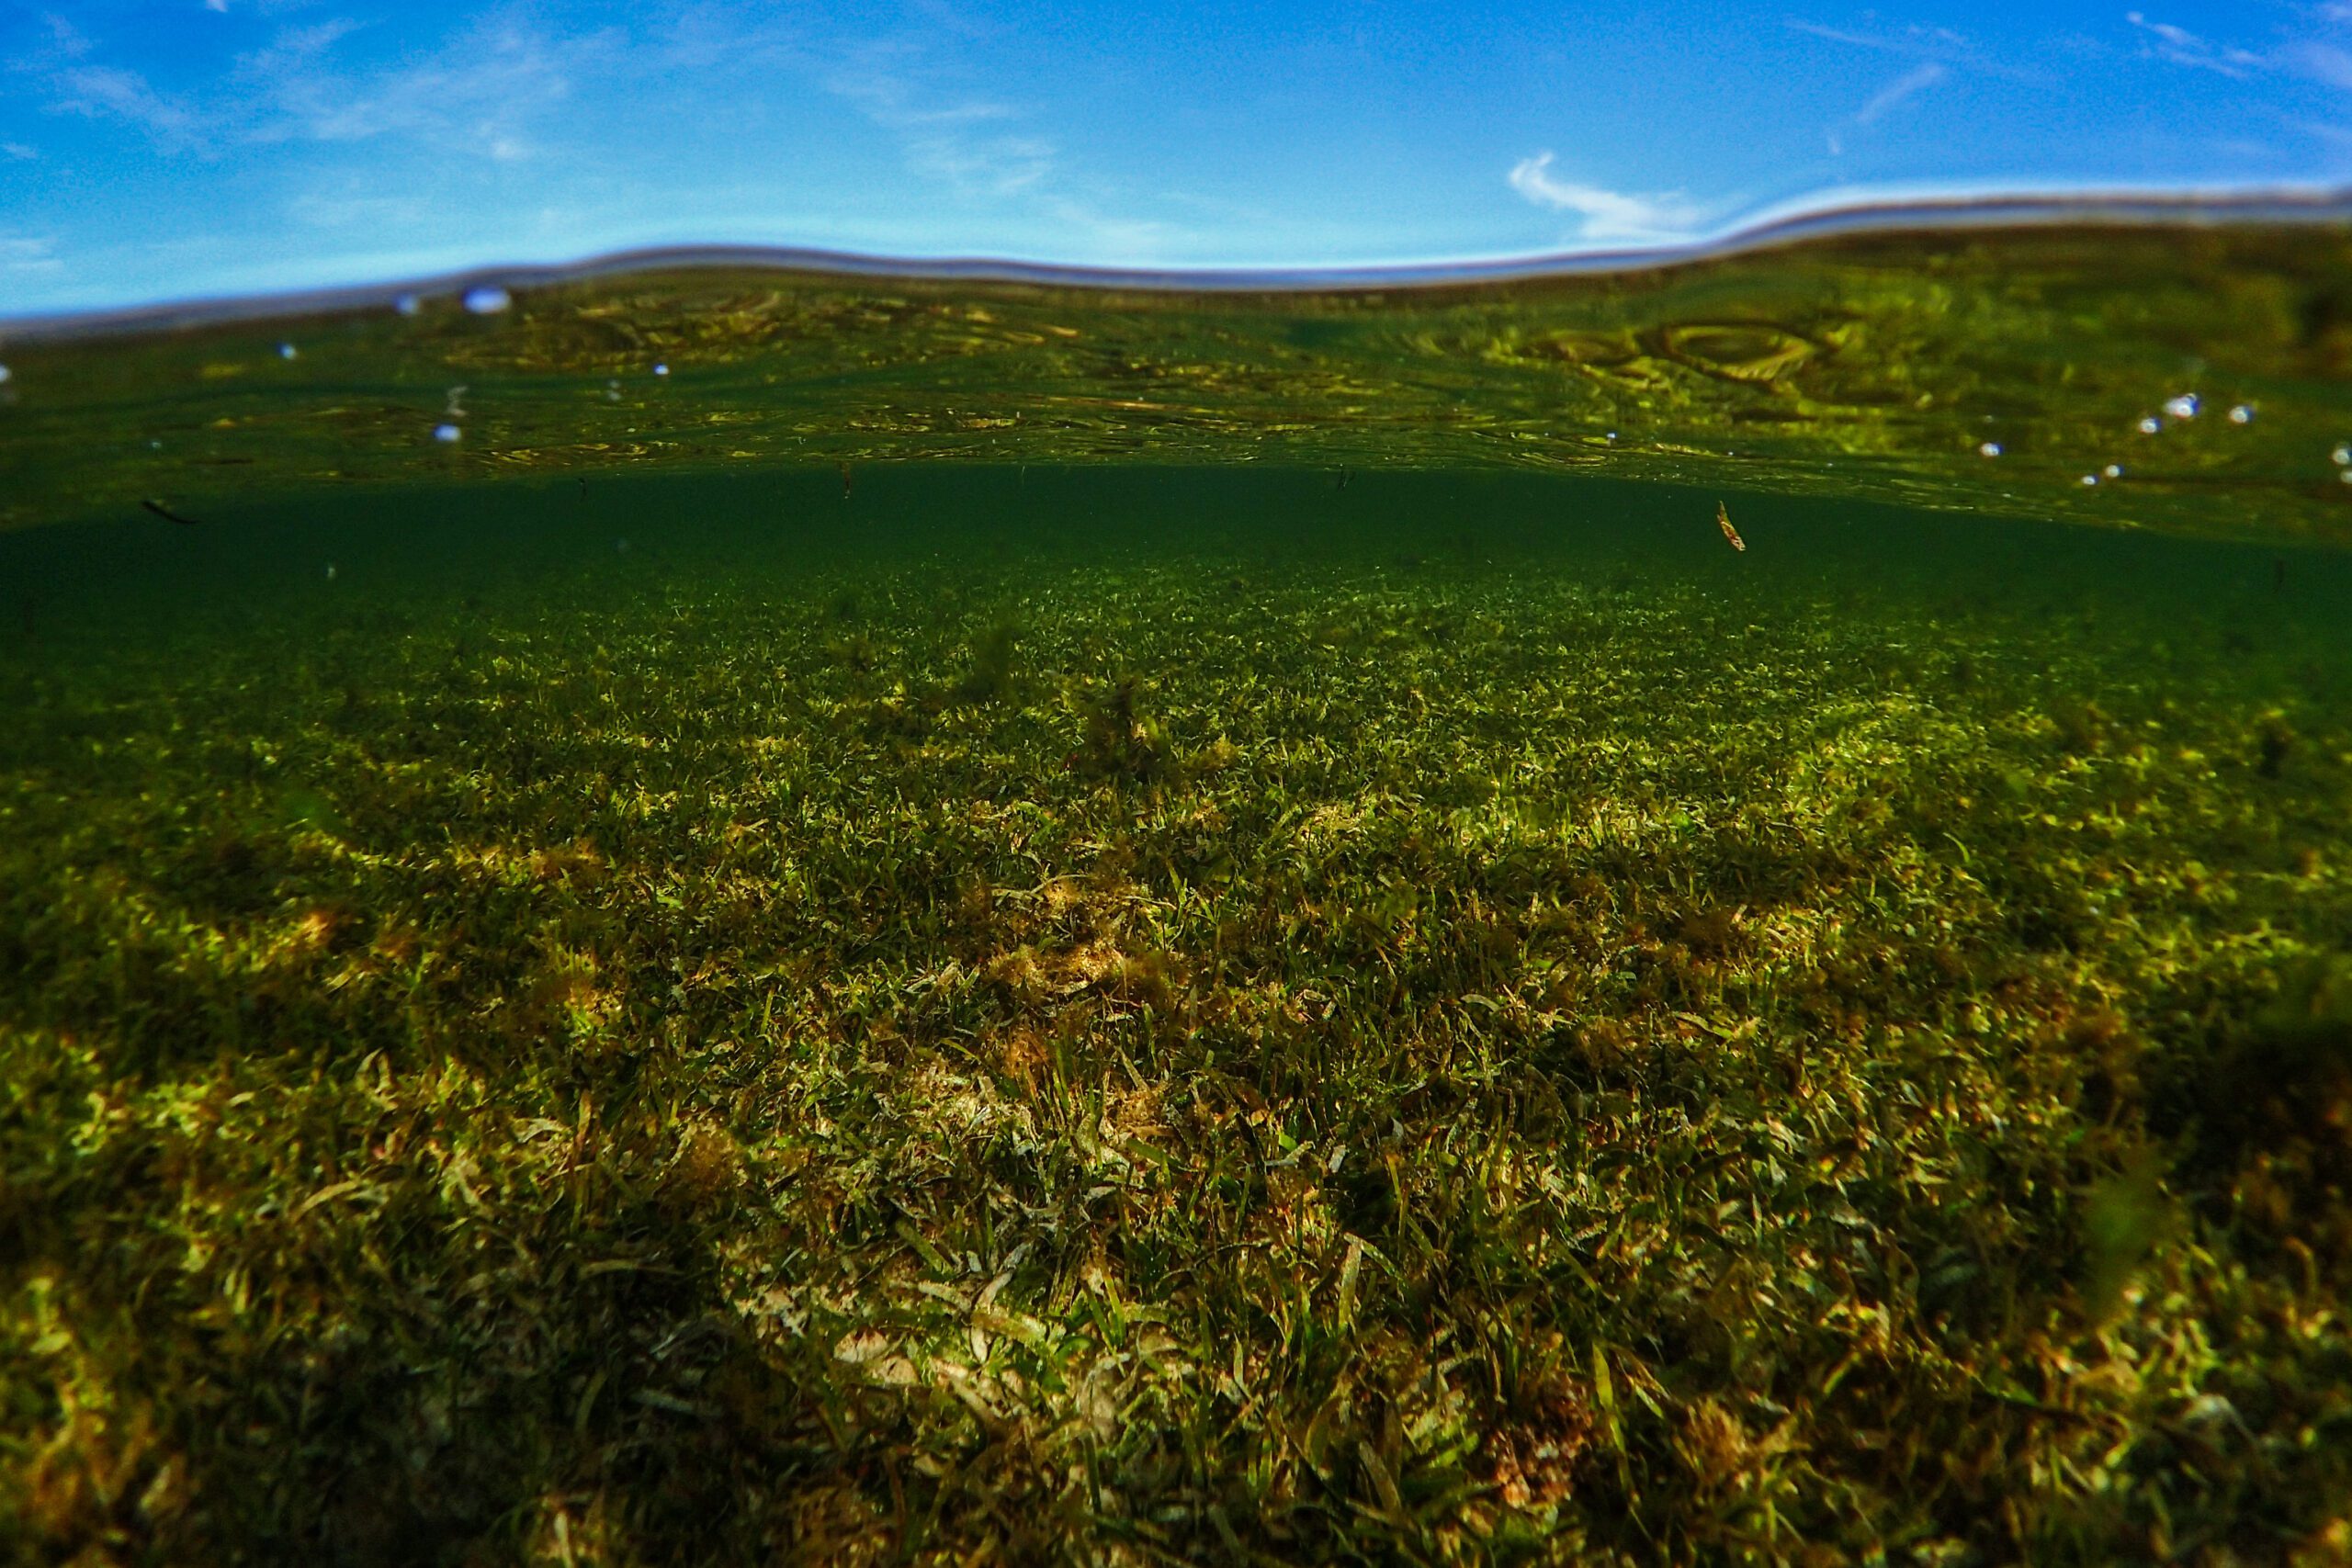 Planting seagrass